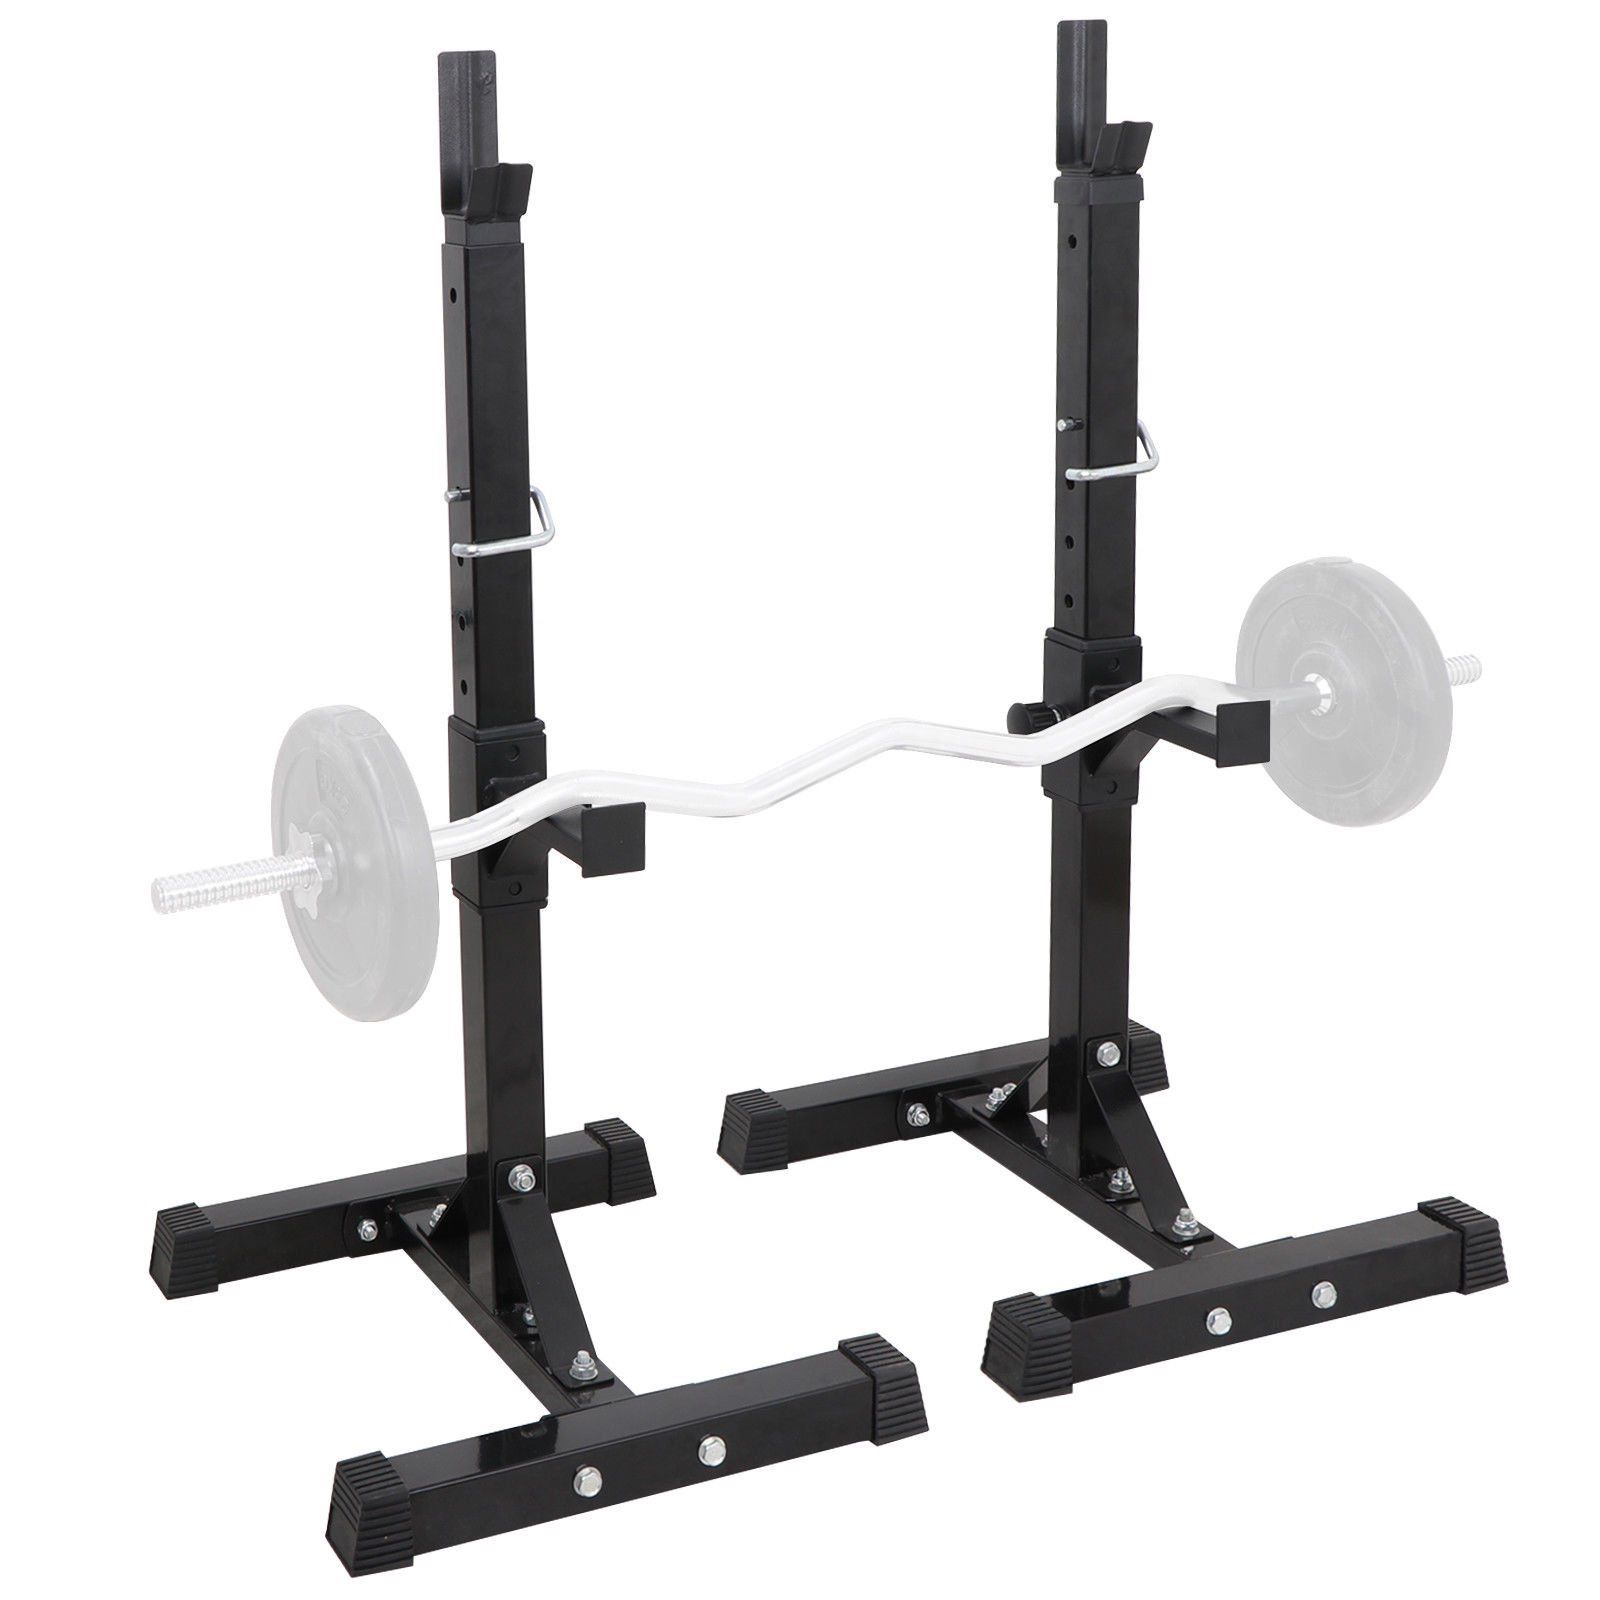 Adjustable Barbell Rack Stand Squat Bench Press Home GYM Weight Liftting Fitness Exercise